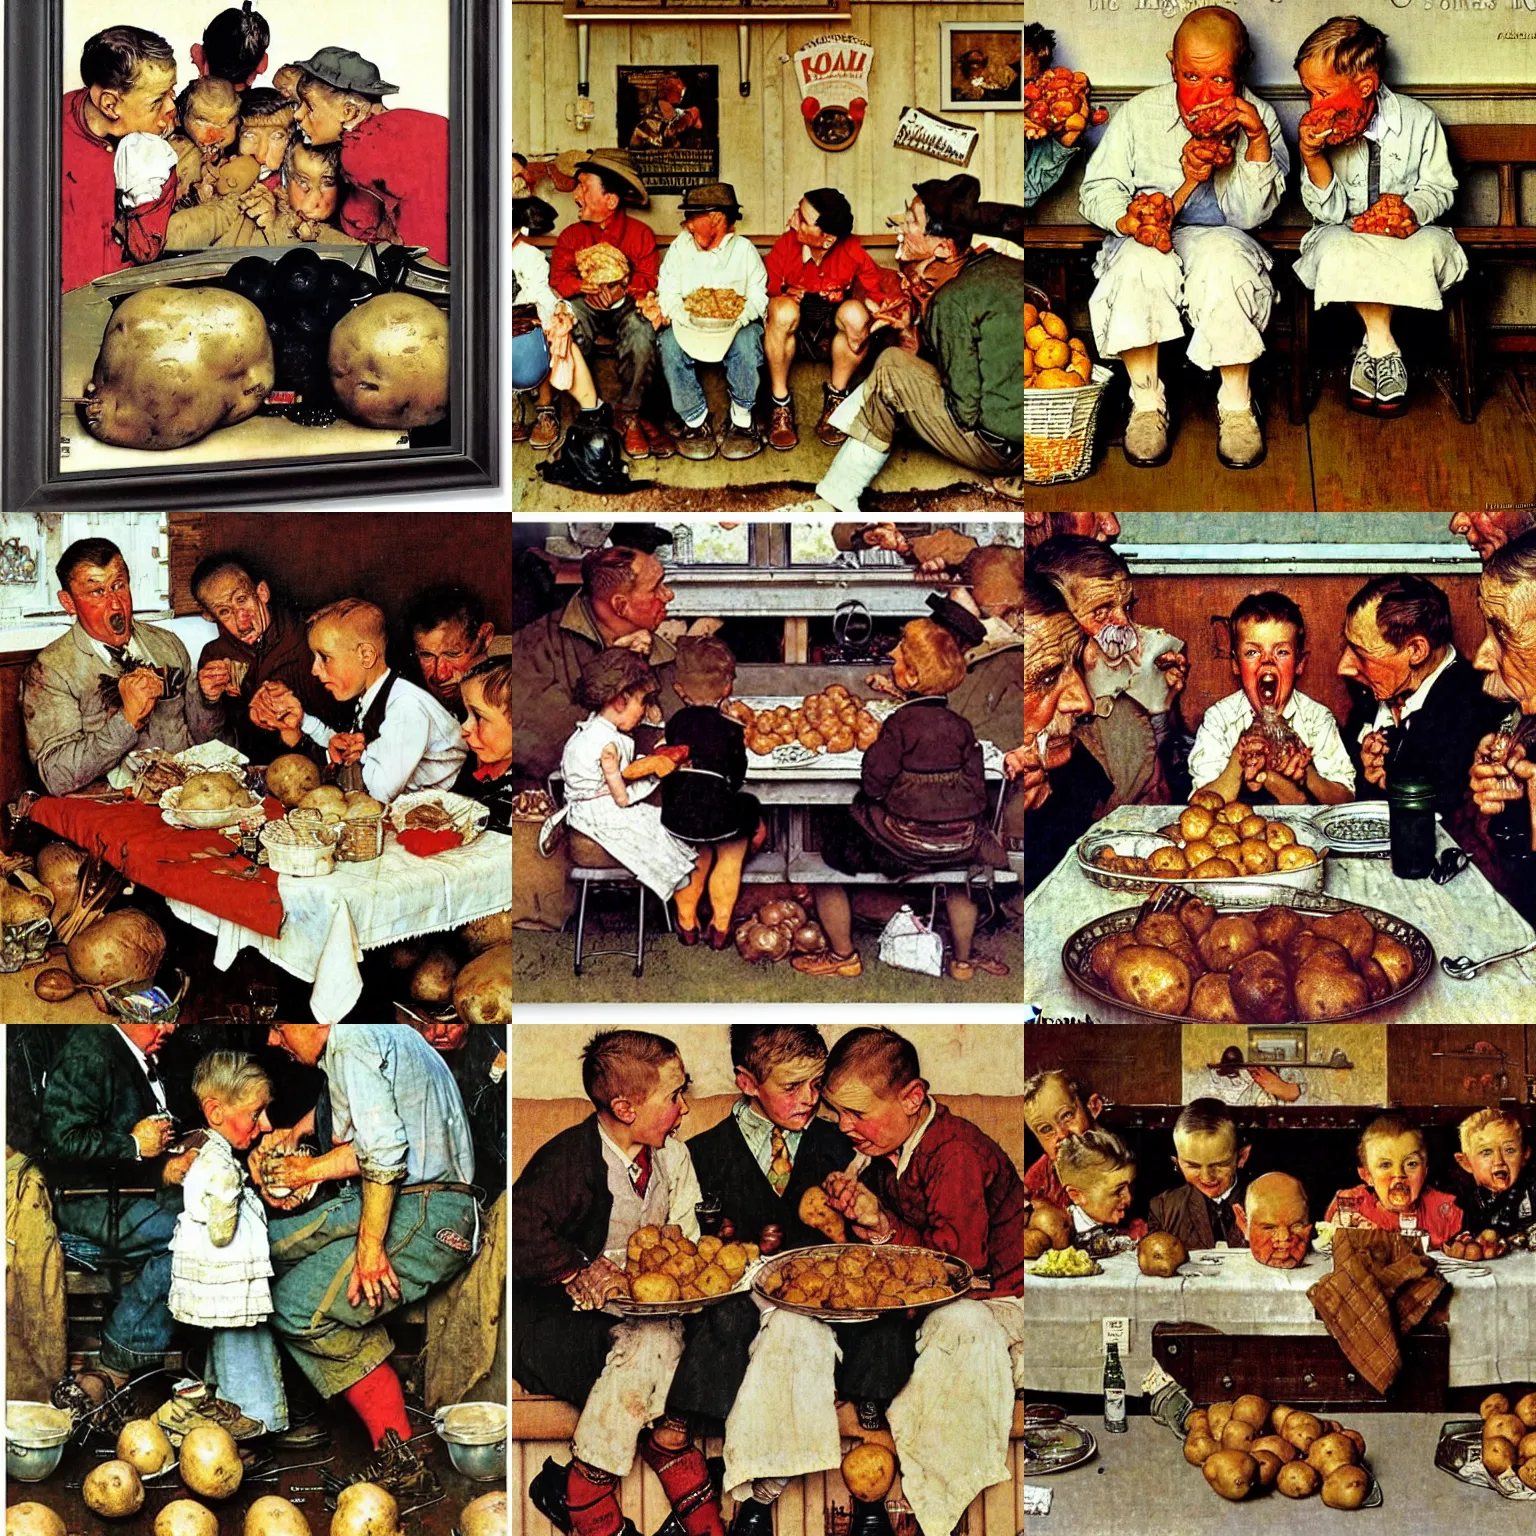 Prompt: The potatoes eaters, by norman rockwell